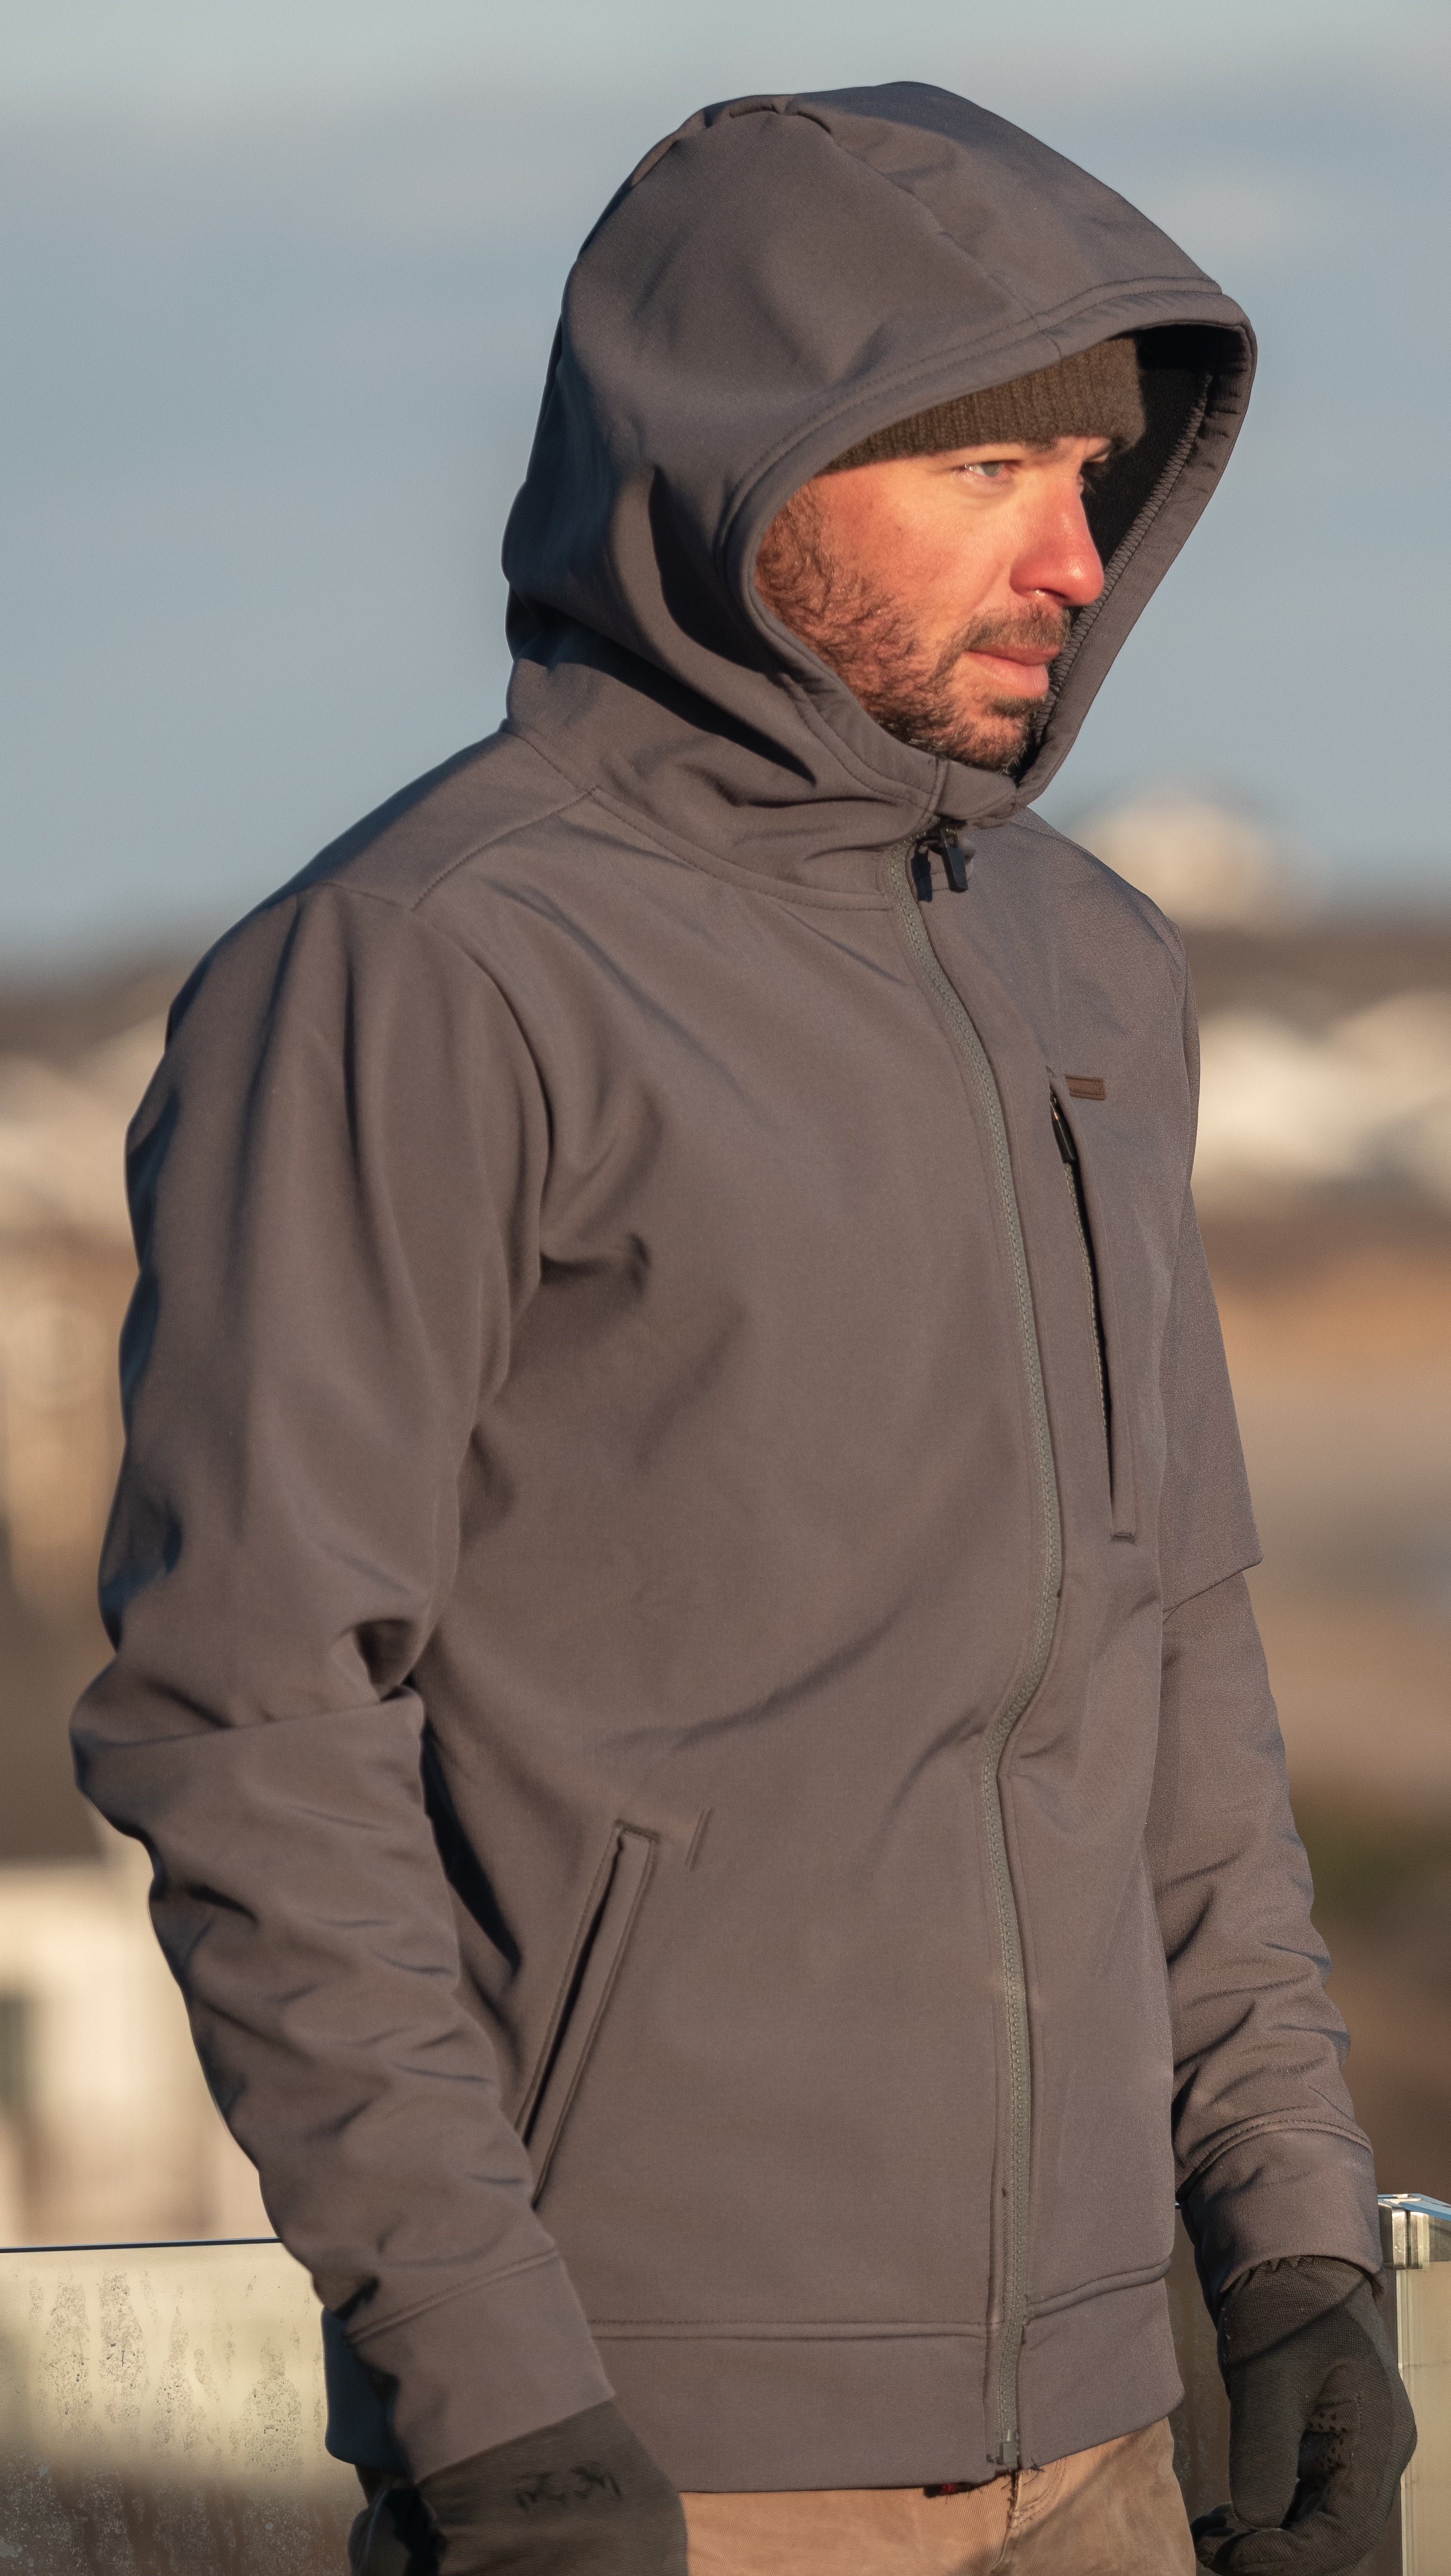 The Patteson Jacket